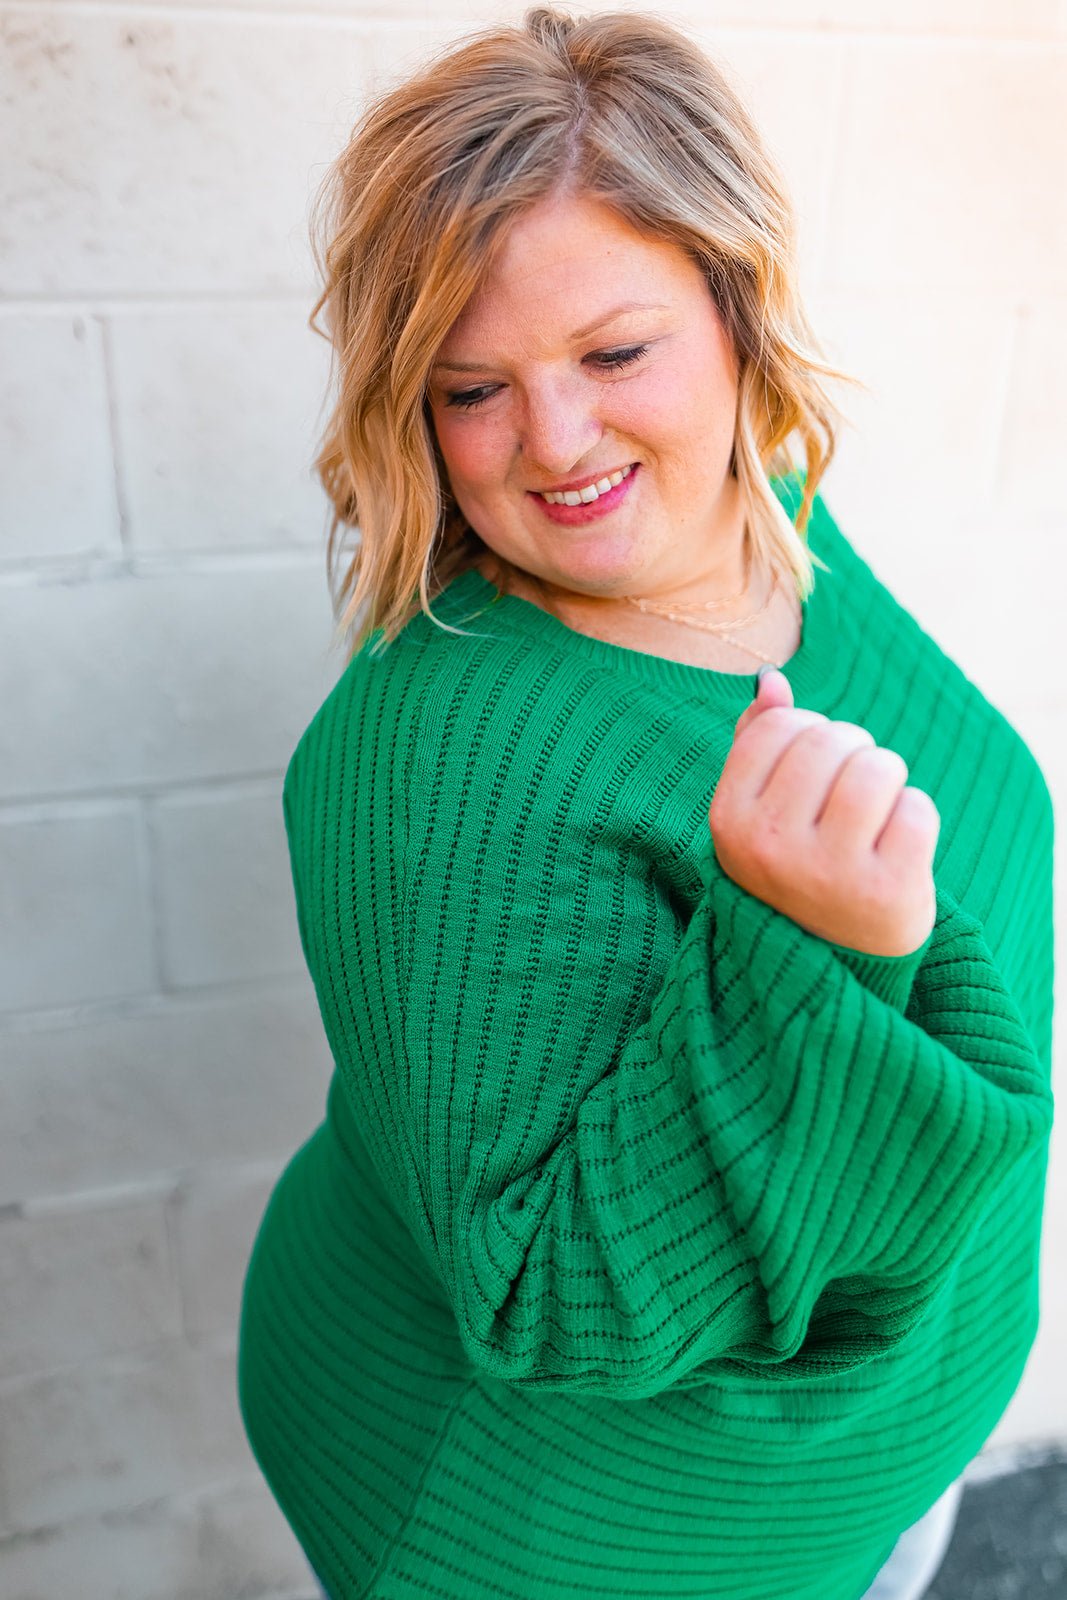 The Amaya Curvy Sweater - One Eleven Olive Boutique